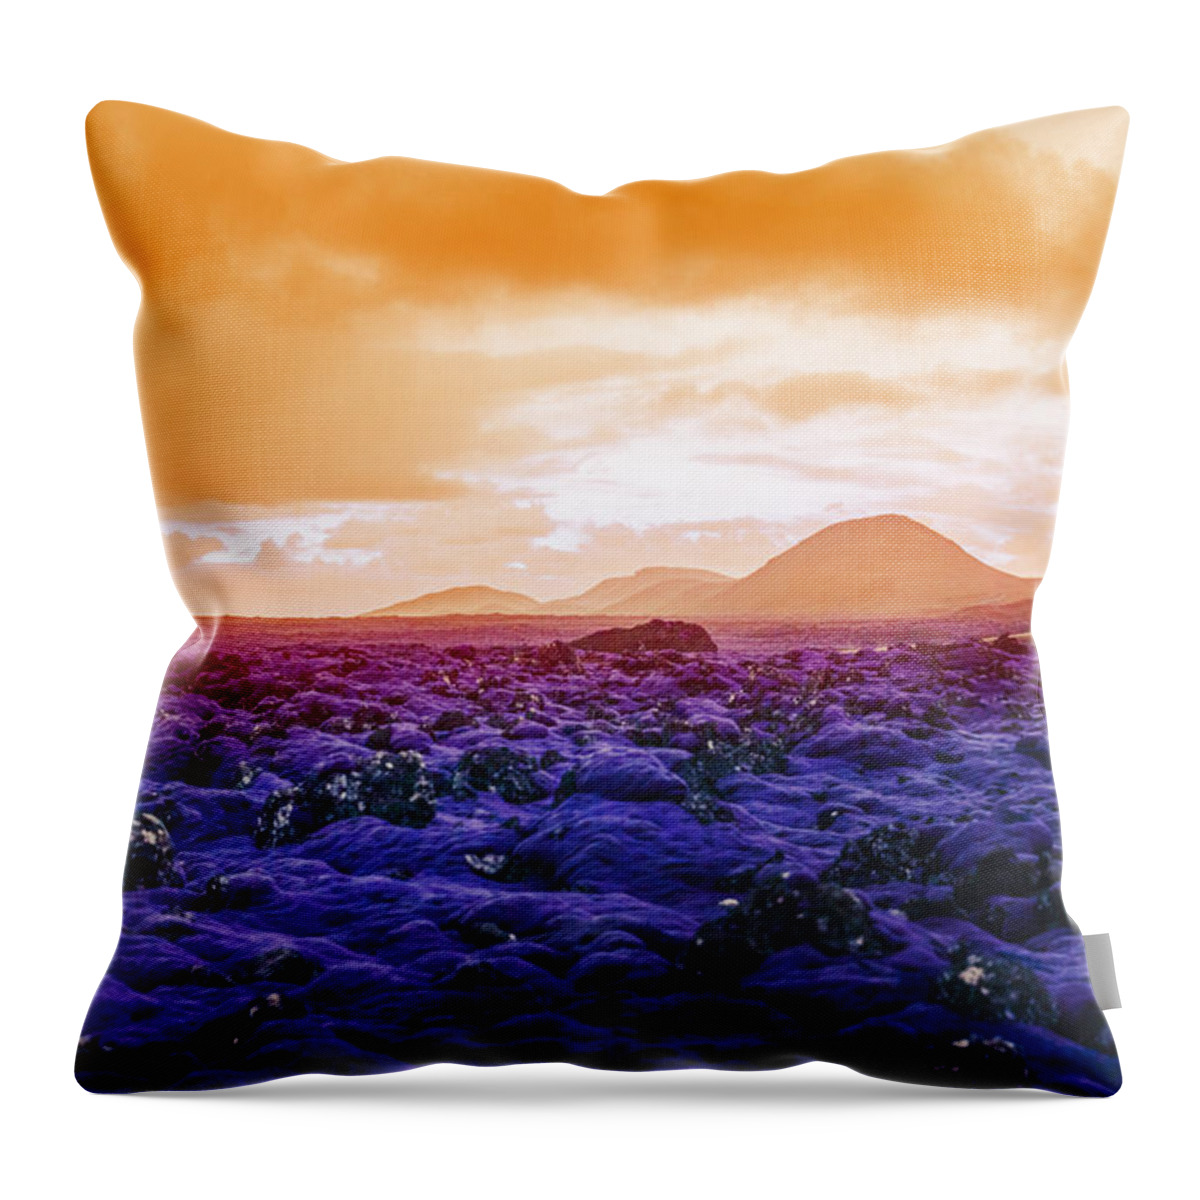 Tranquility Throw Pillow featuring the photograph Dramatic Landscape Against Cloudy Sky by Portra